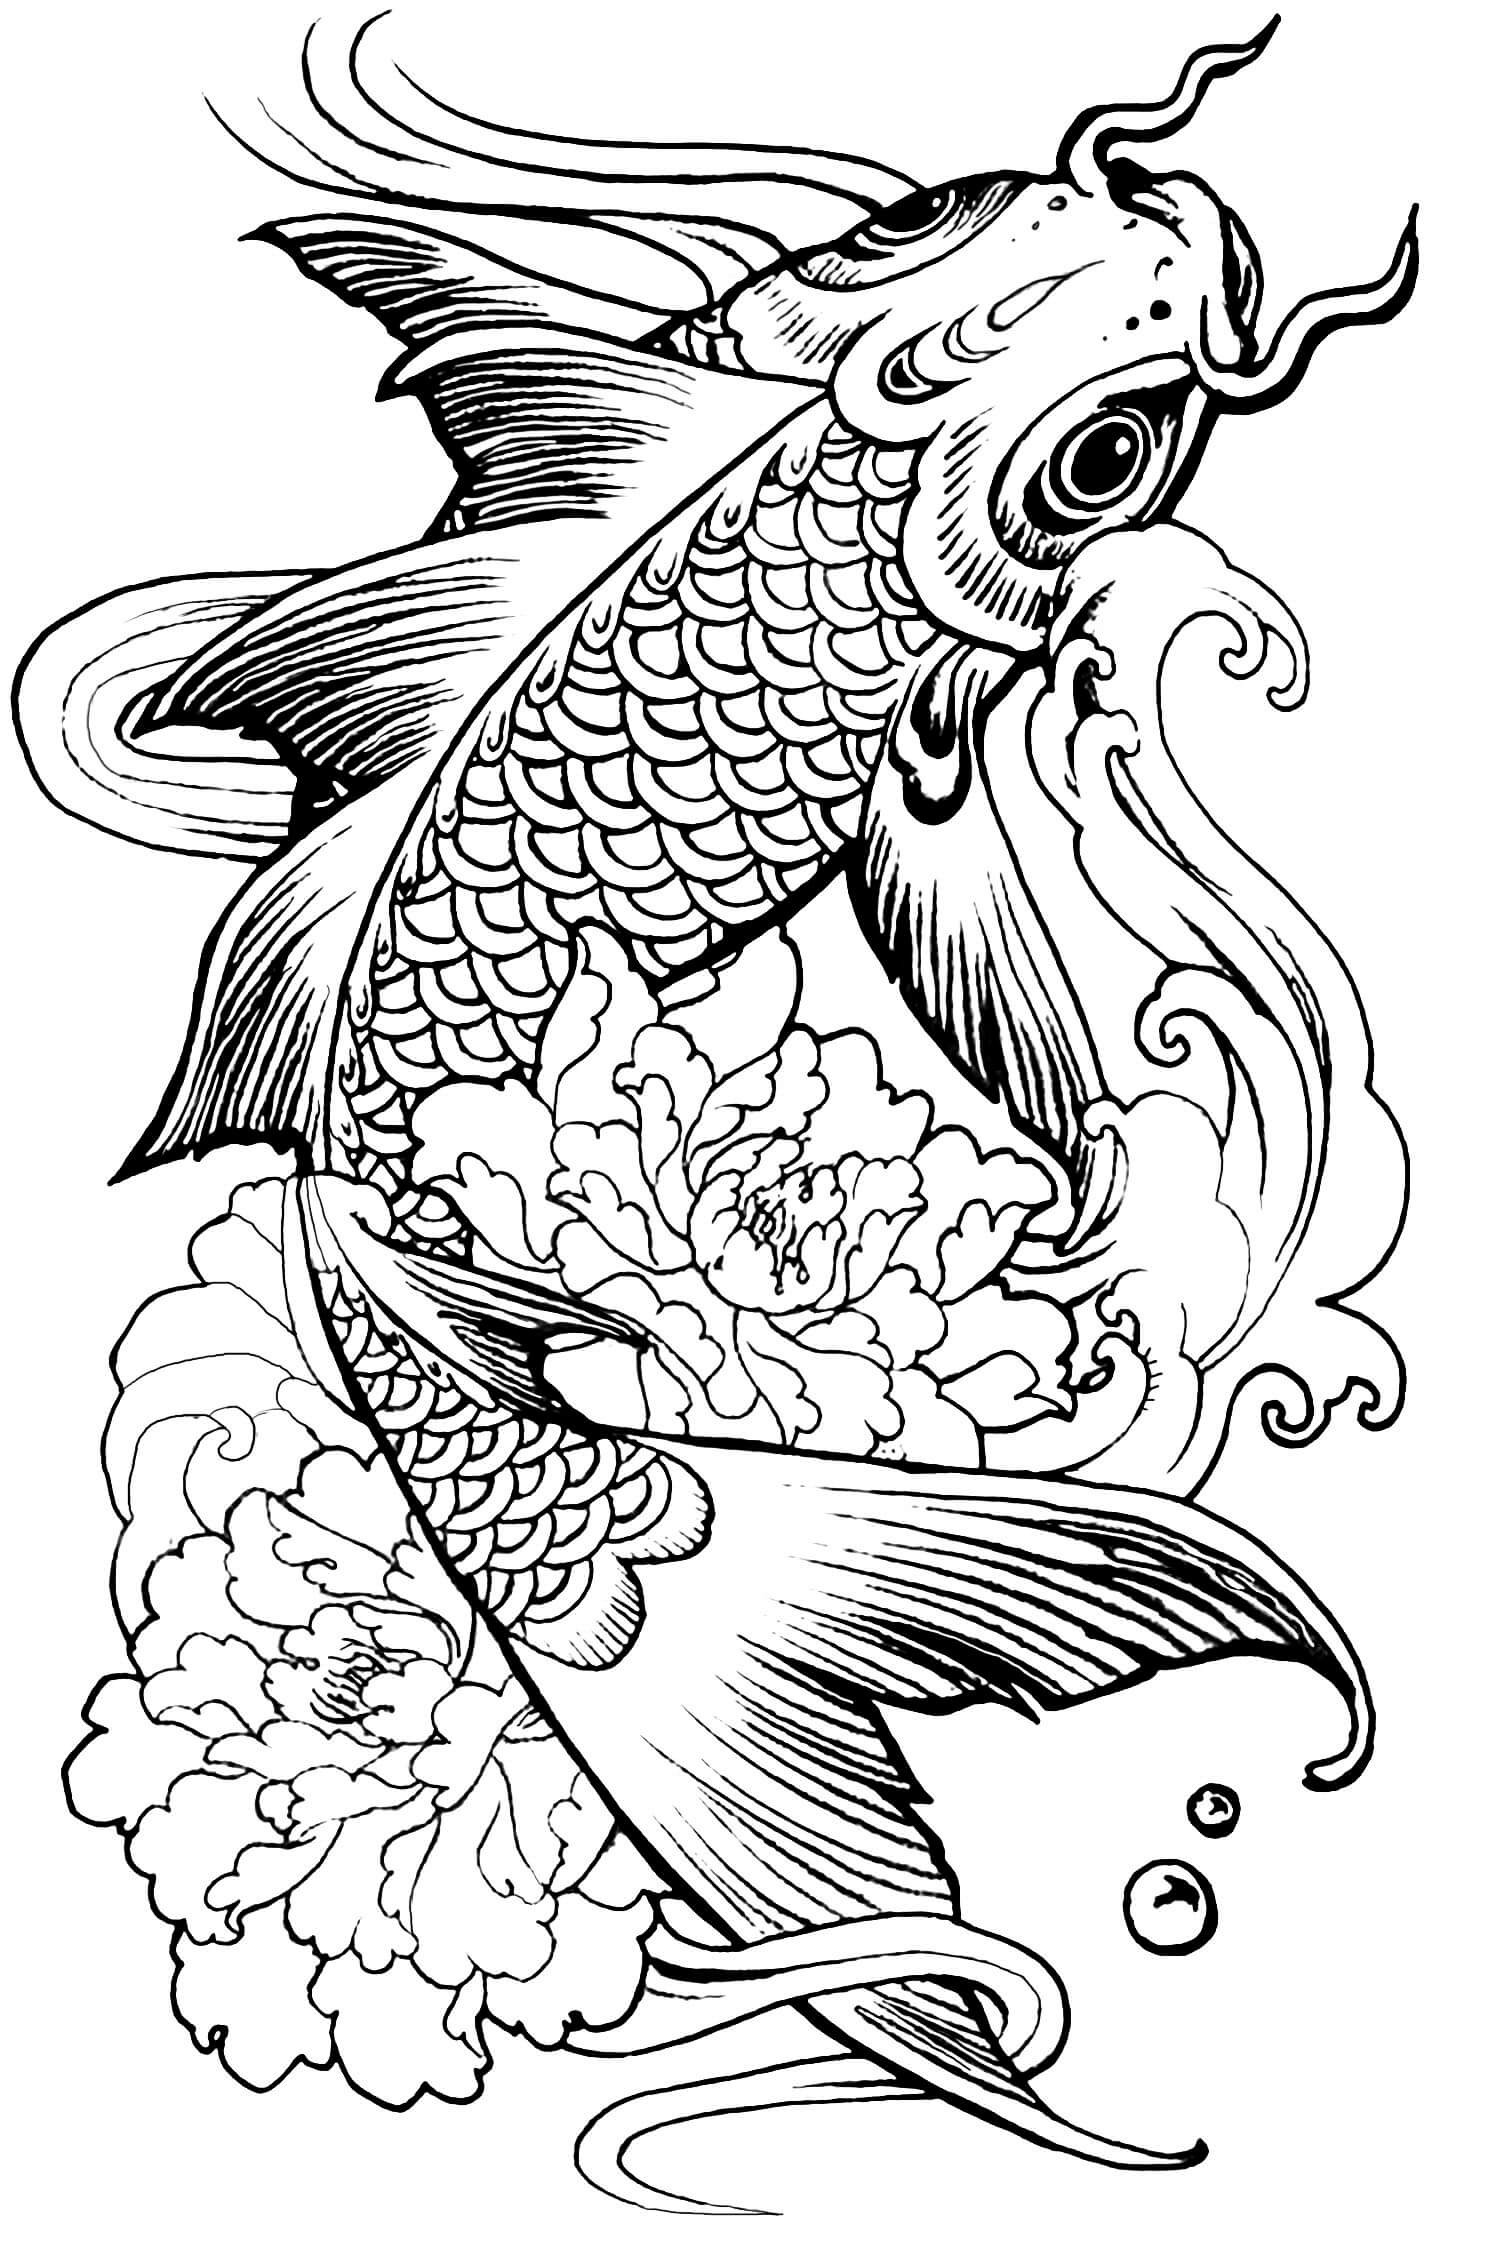 Coloring Pages For Adults Animals
 Animal Coloring Pages Best Coloring Pages For Kids